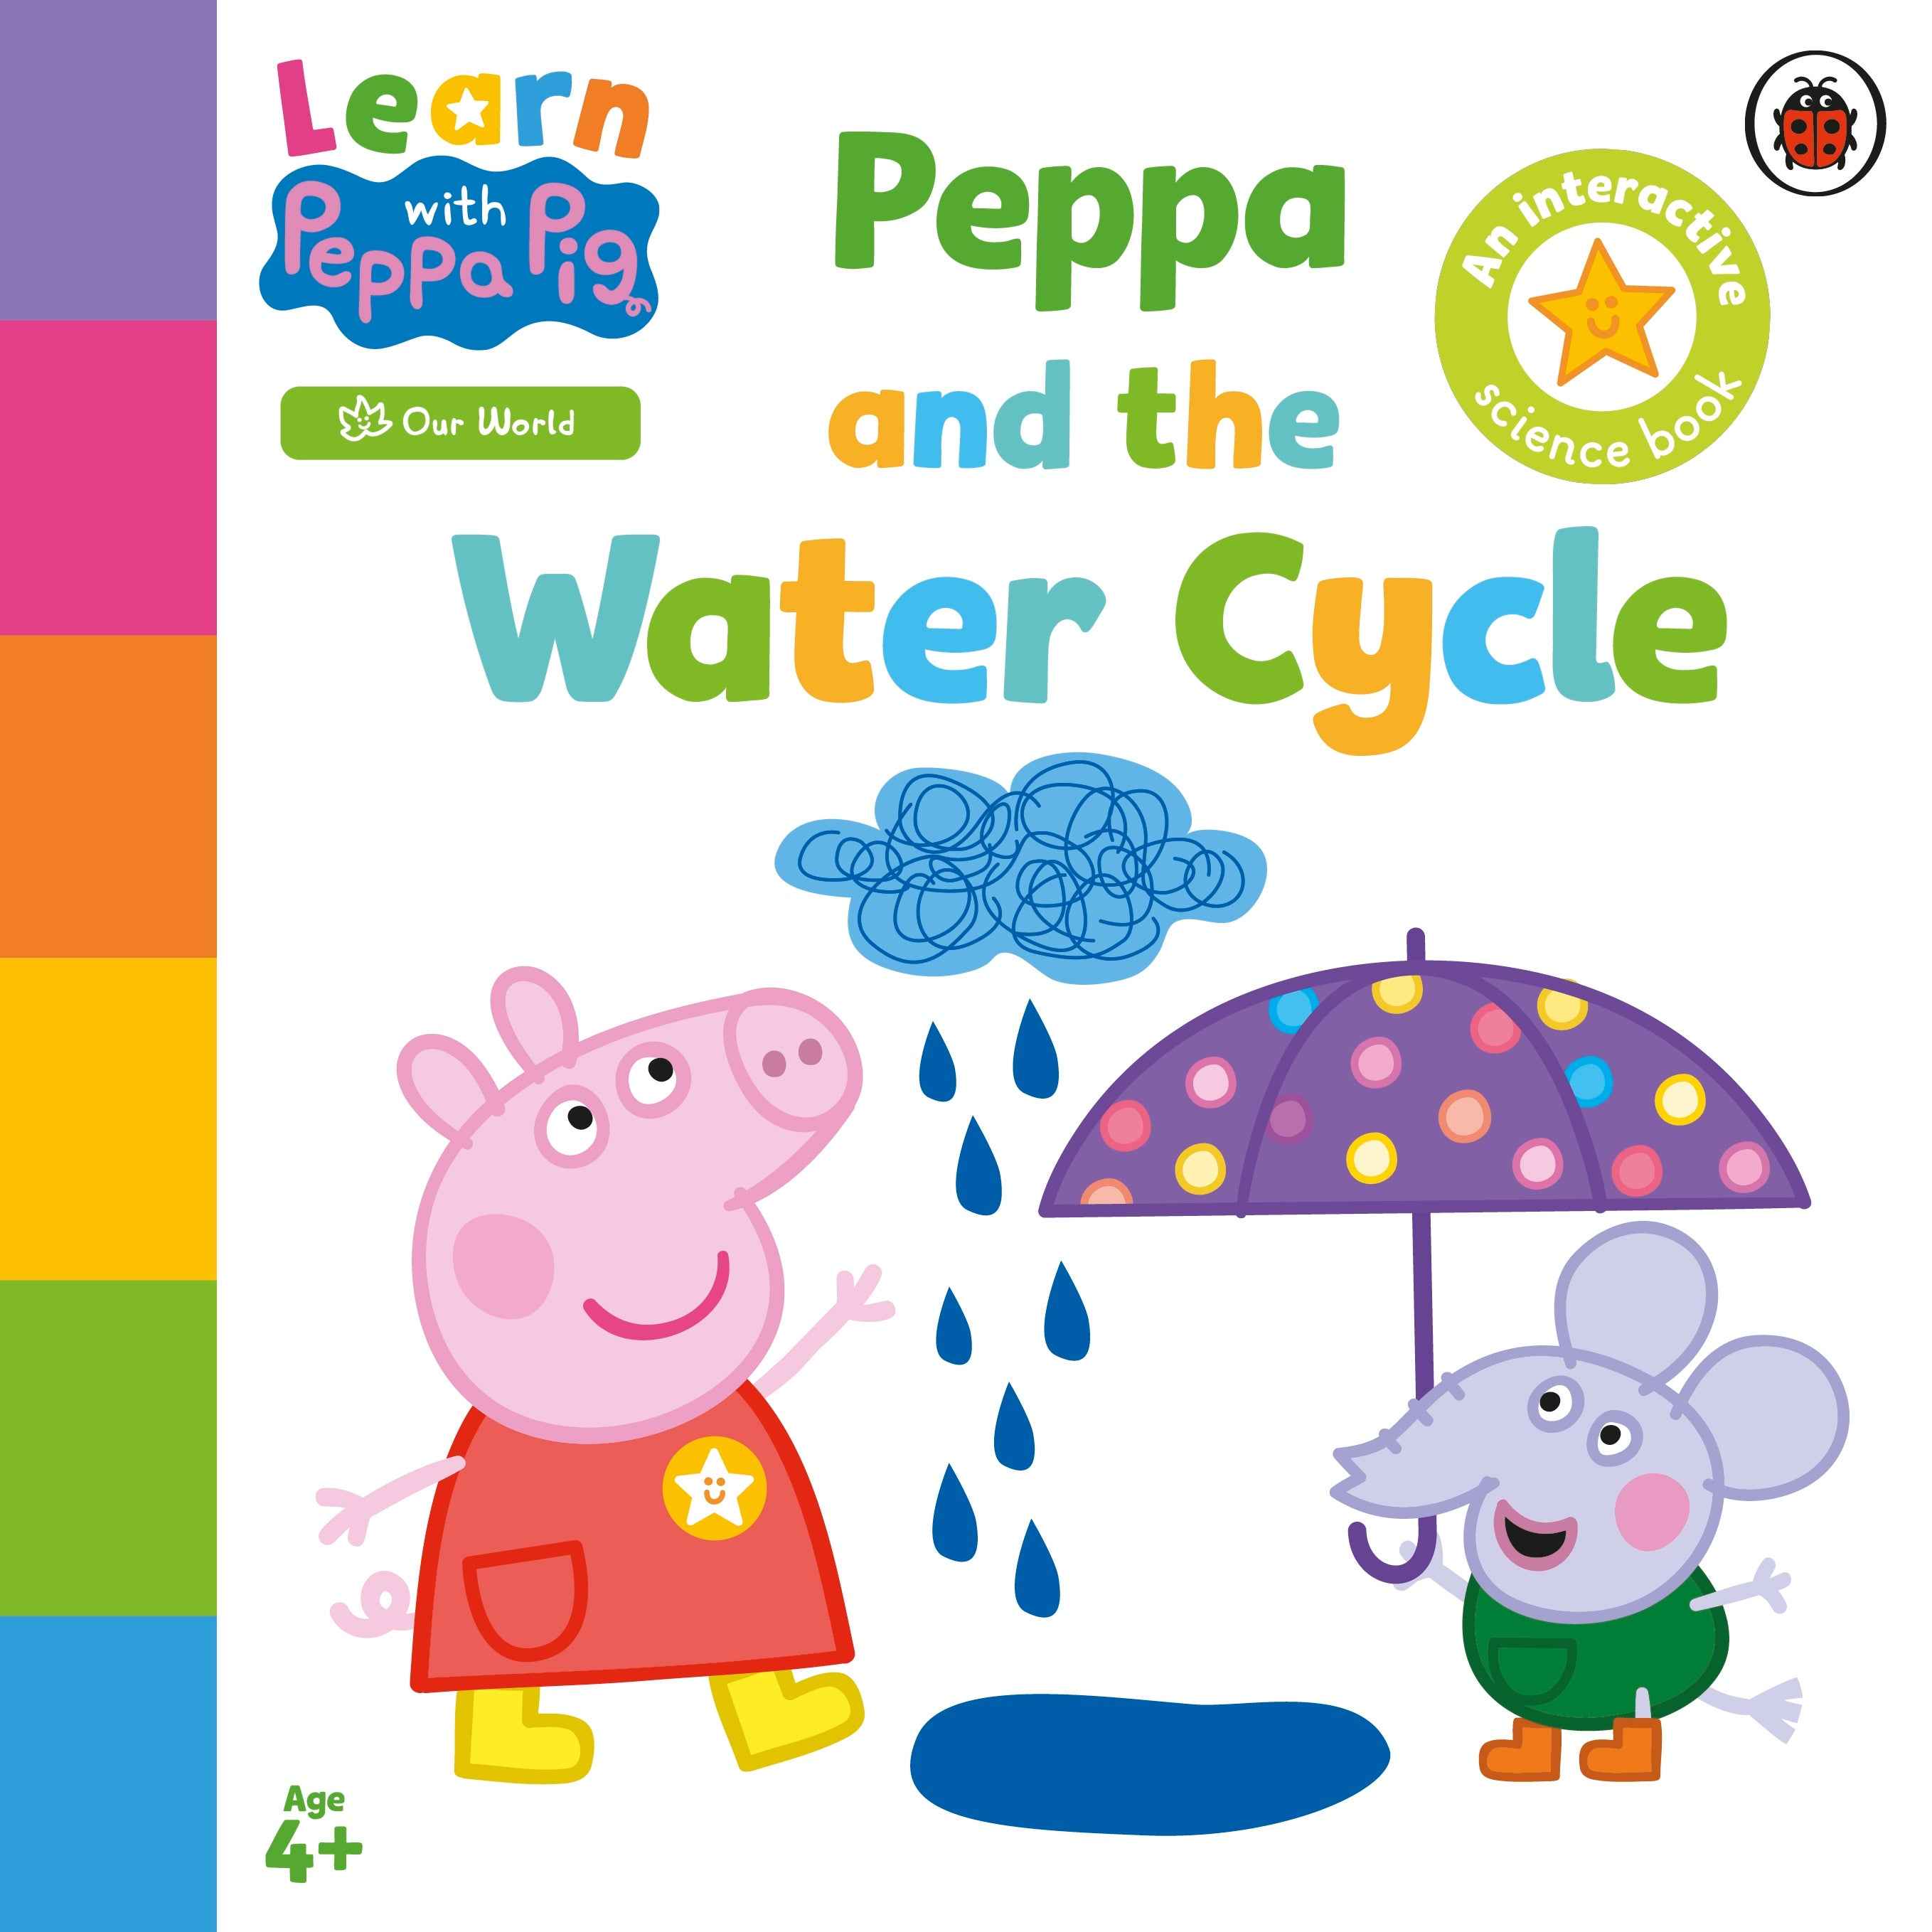 Peppa and the Water Cycle